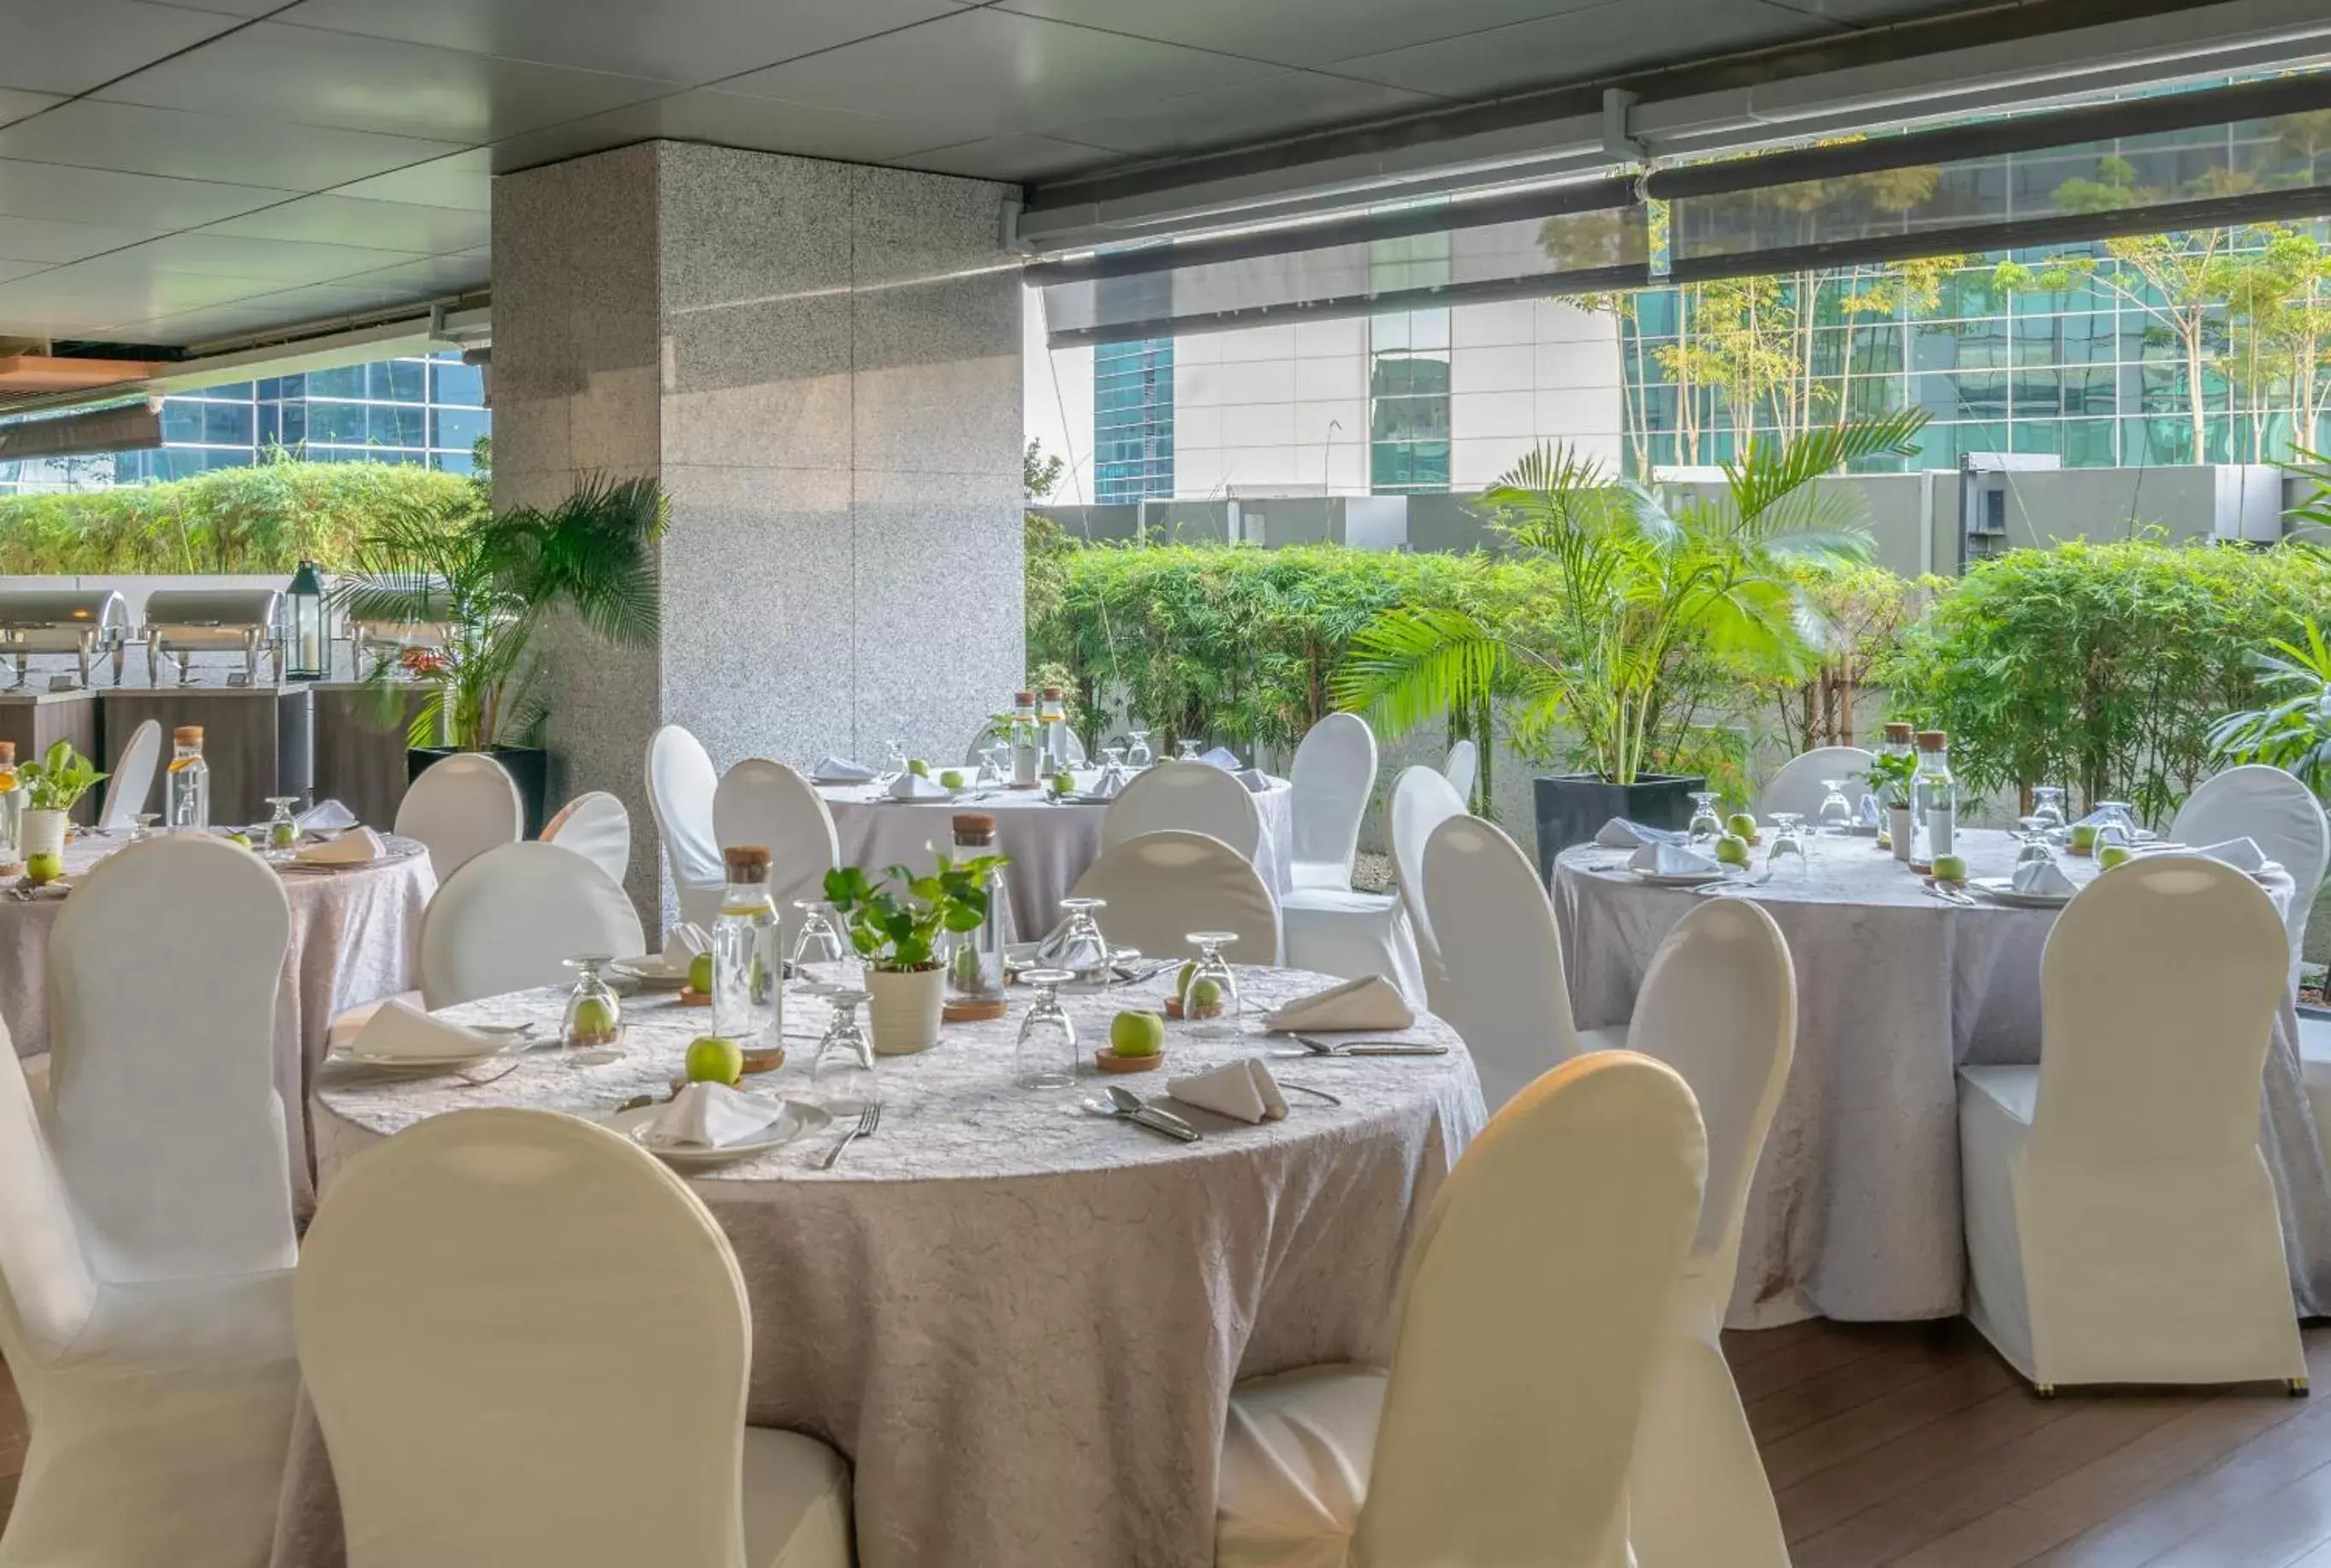 Banquet/Function facilities, Banquet Facilities in Oasia Hotel Novena, Singapore by Far East Hospitality